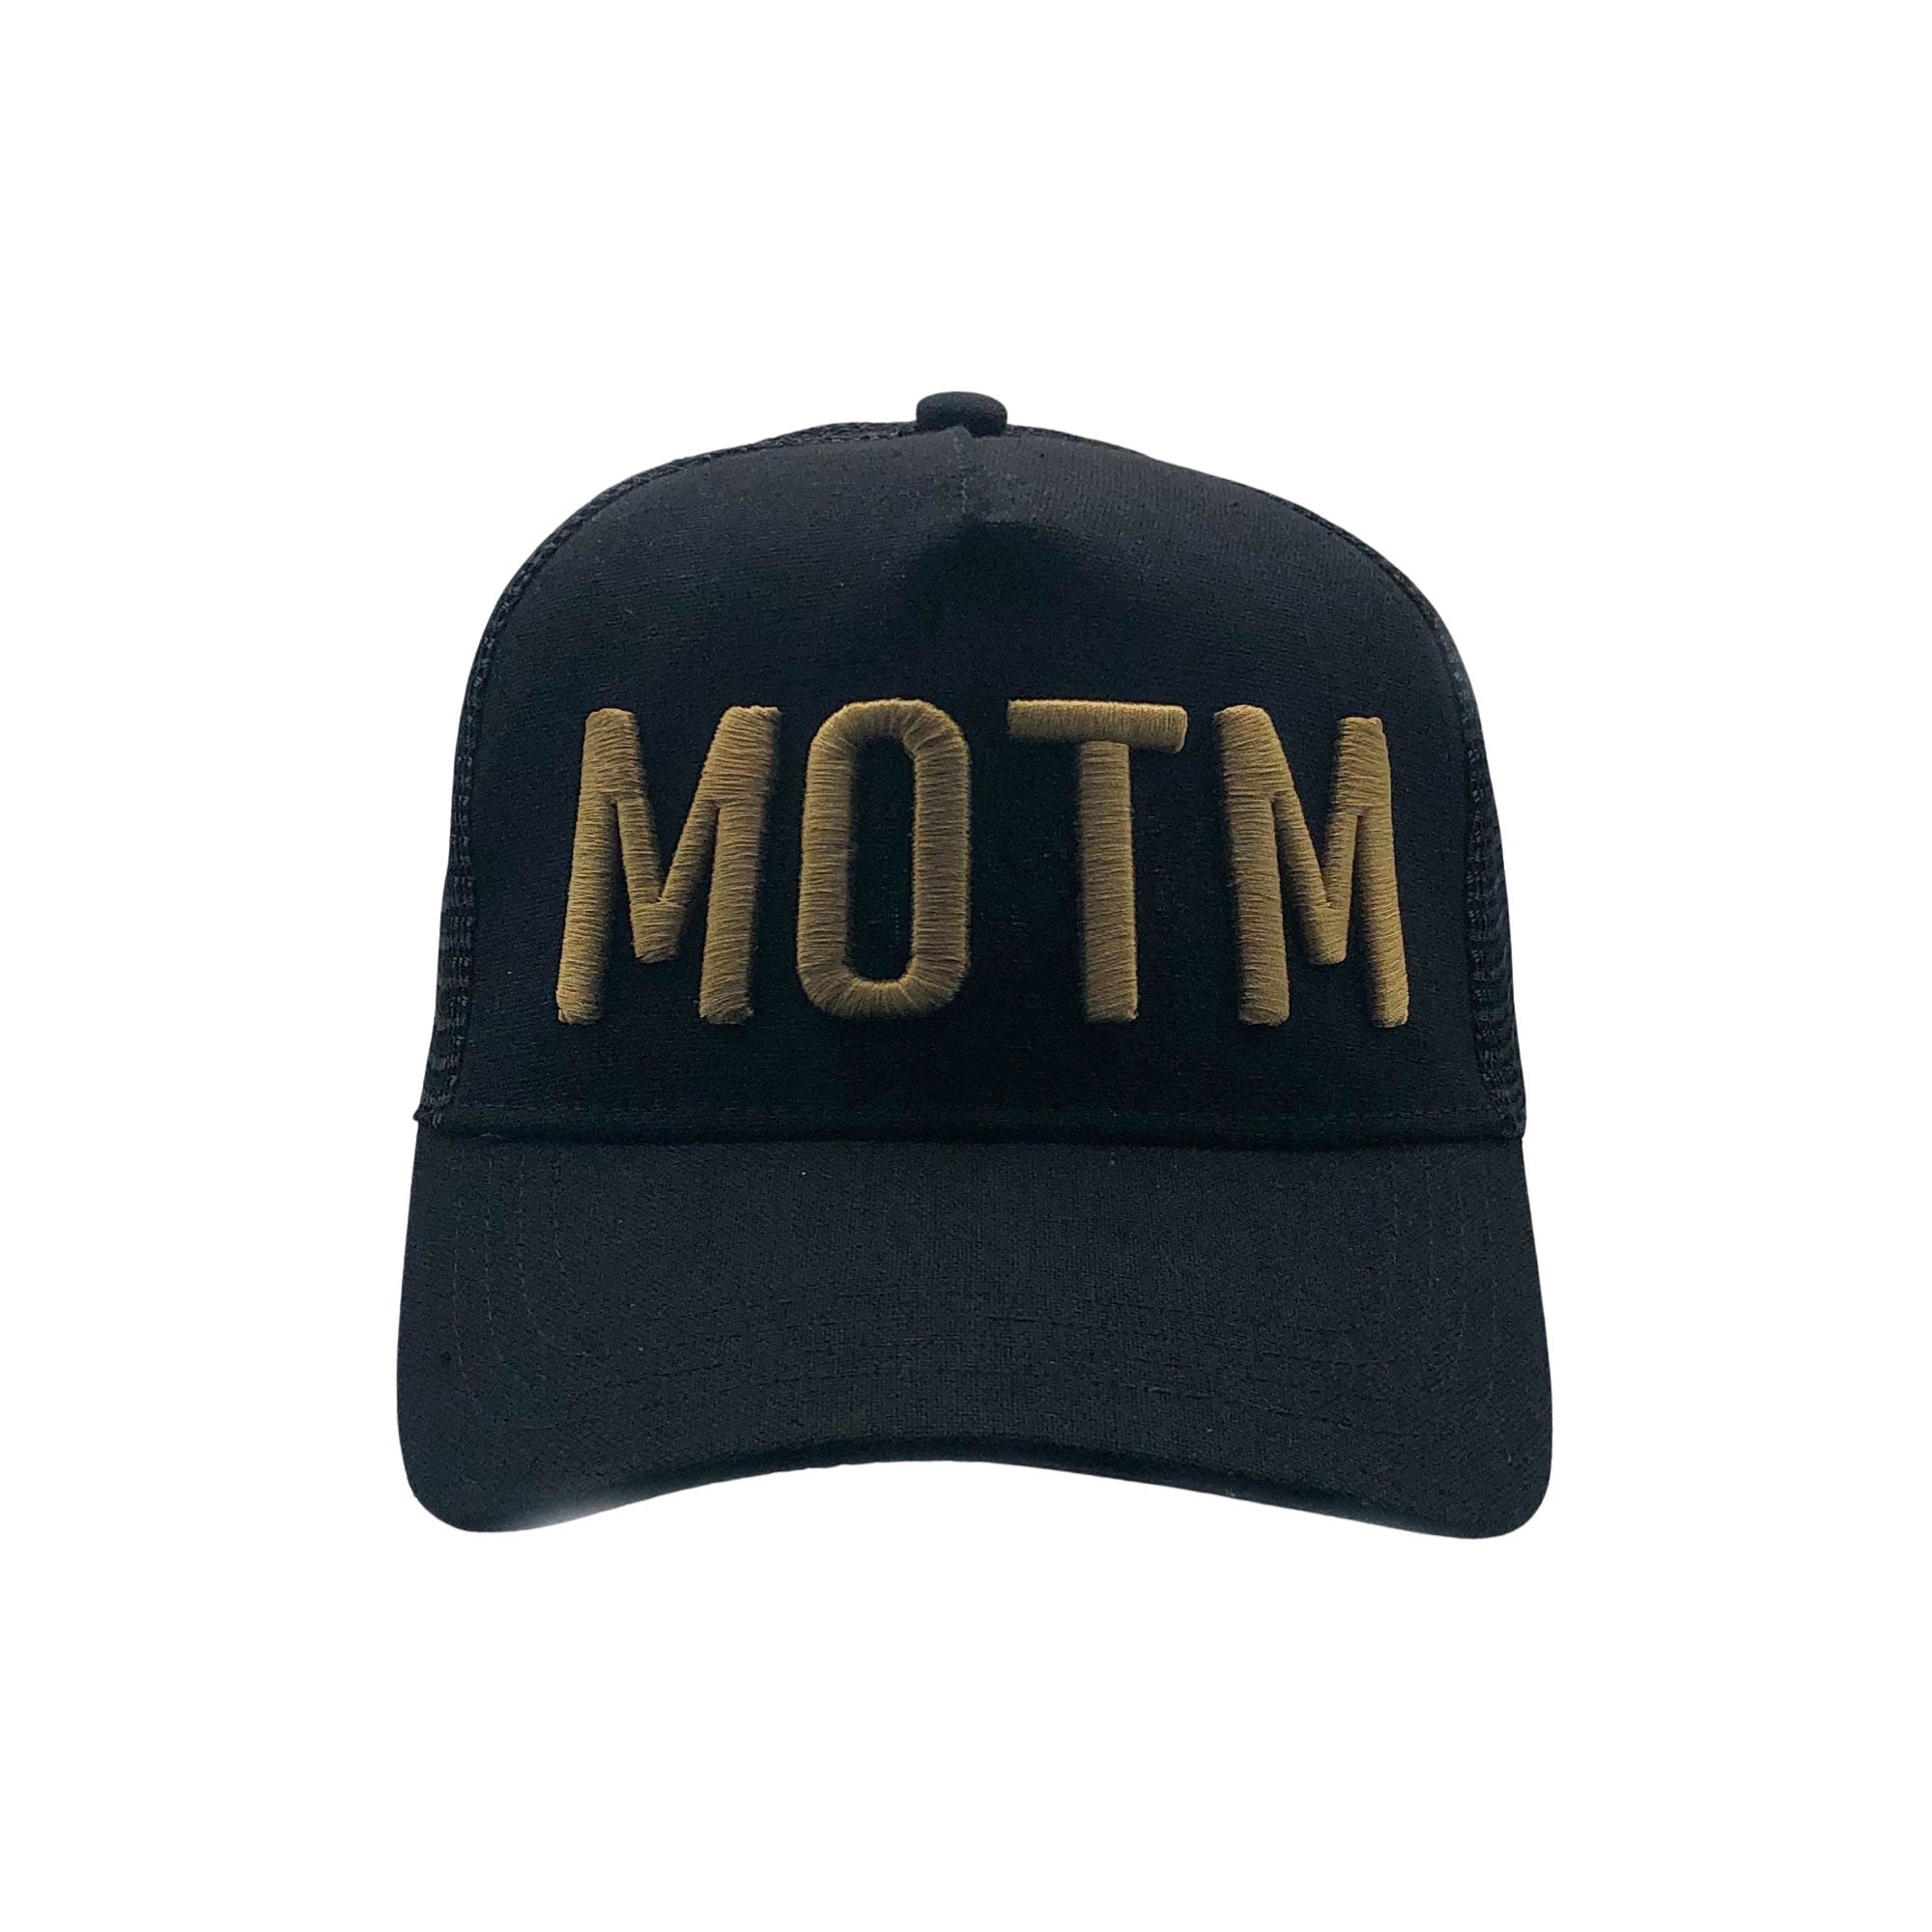 MAN OF THE MATCH® Roberto Carlos Official Cap - MOTM ICON 3D Embroidered Gold on Black - Premium Linen